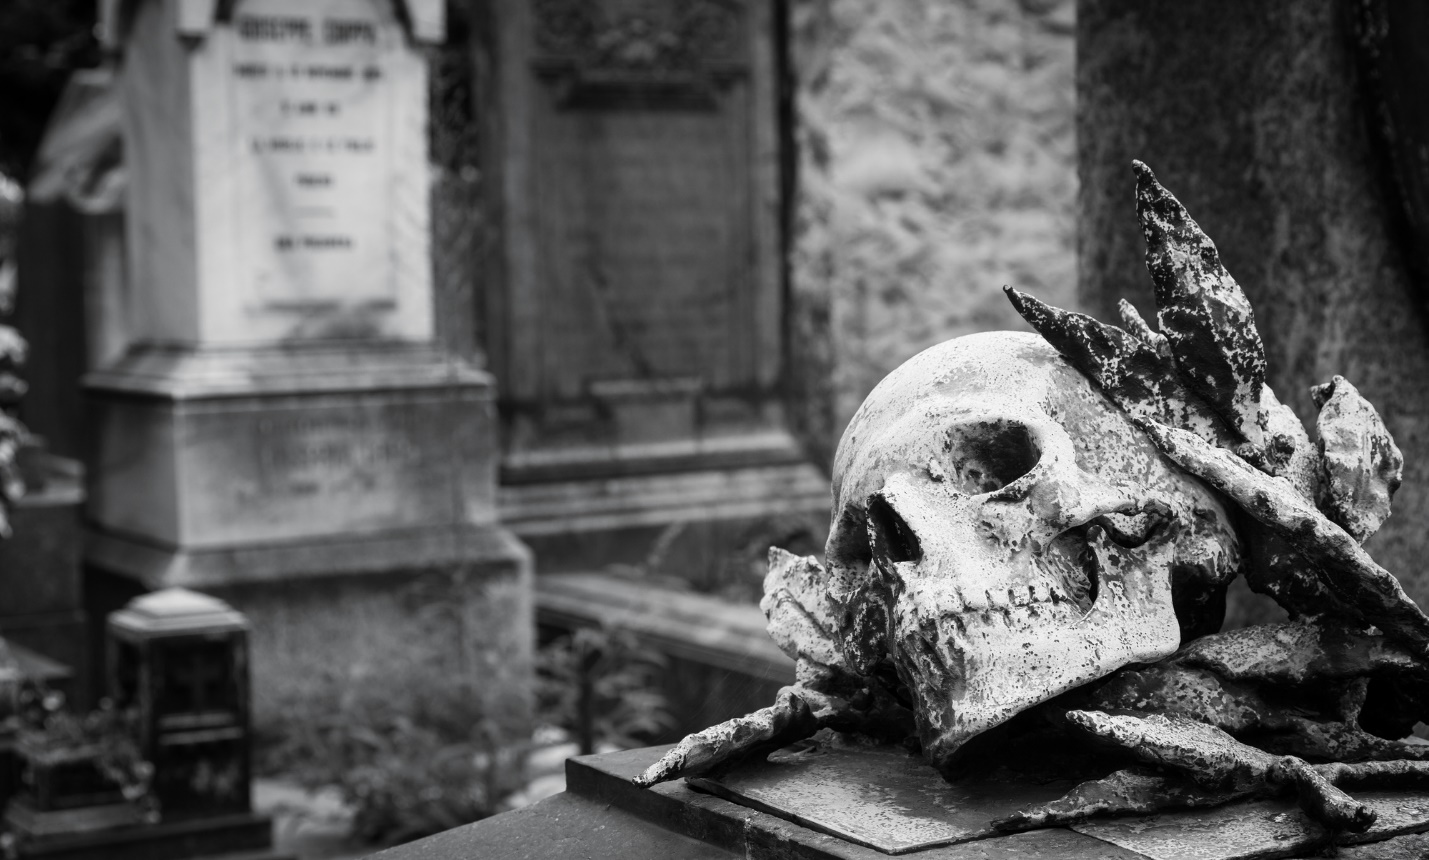 A skull on a grave

Description automatically generated